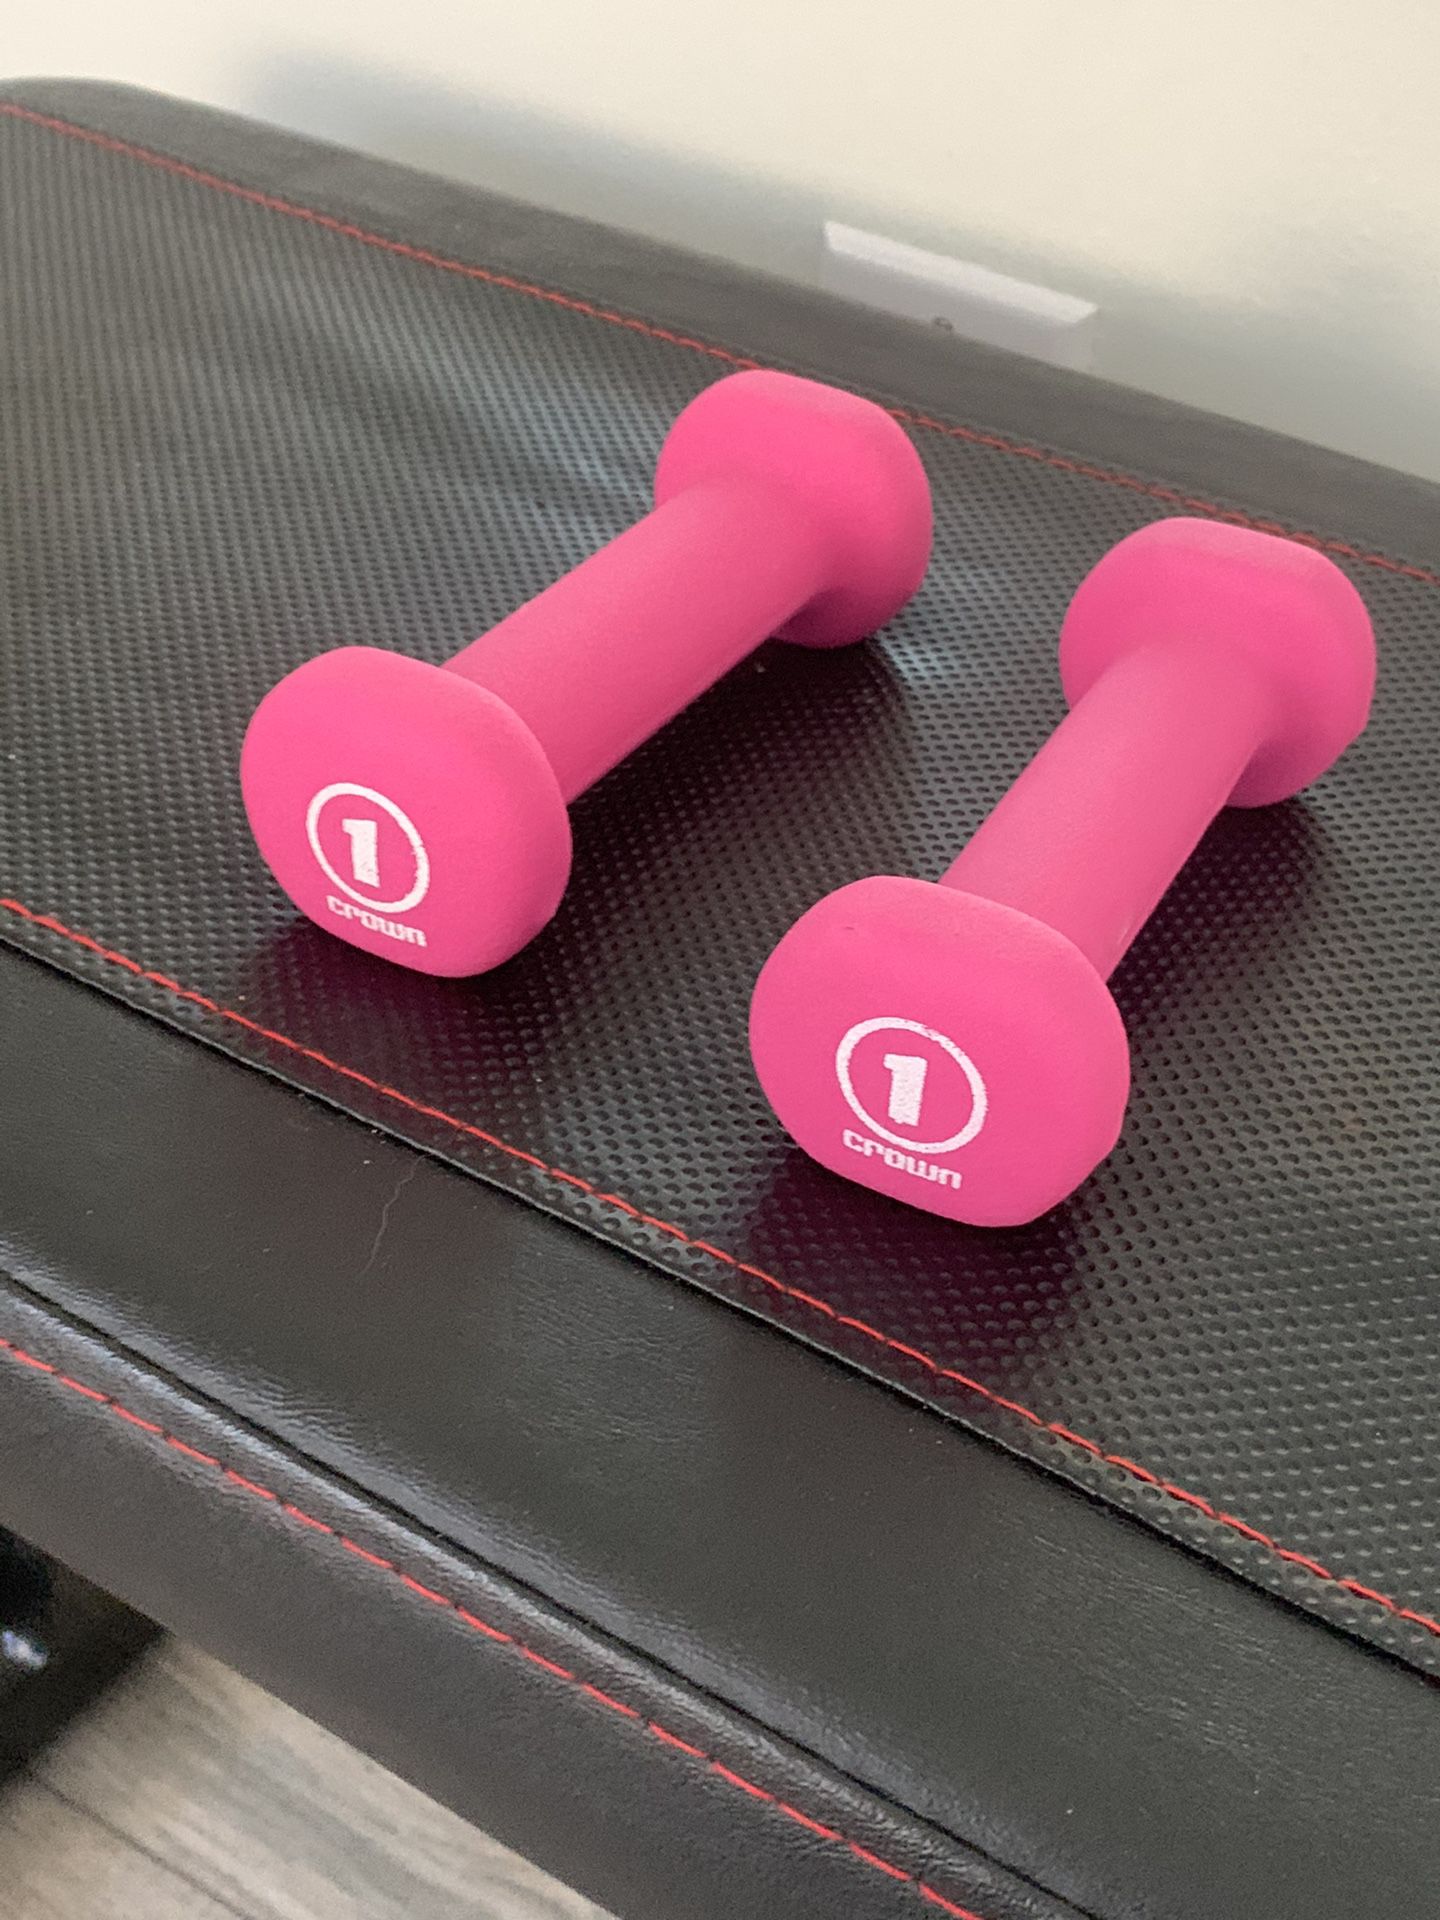 1 and 3 lb dumbbell sets